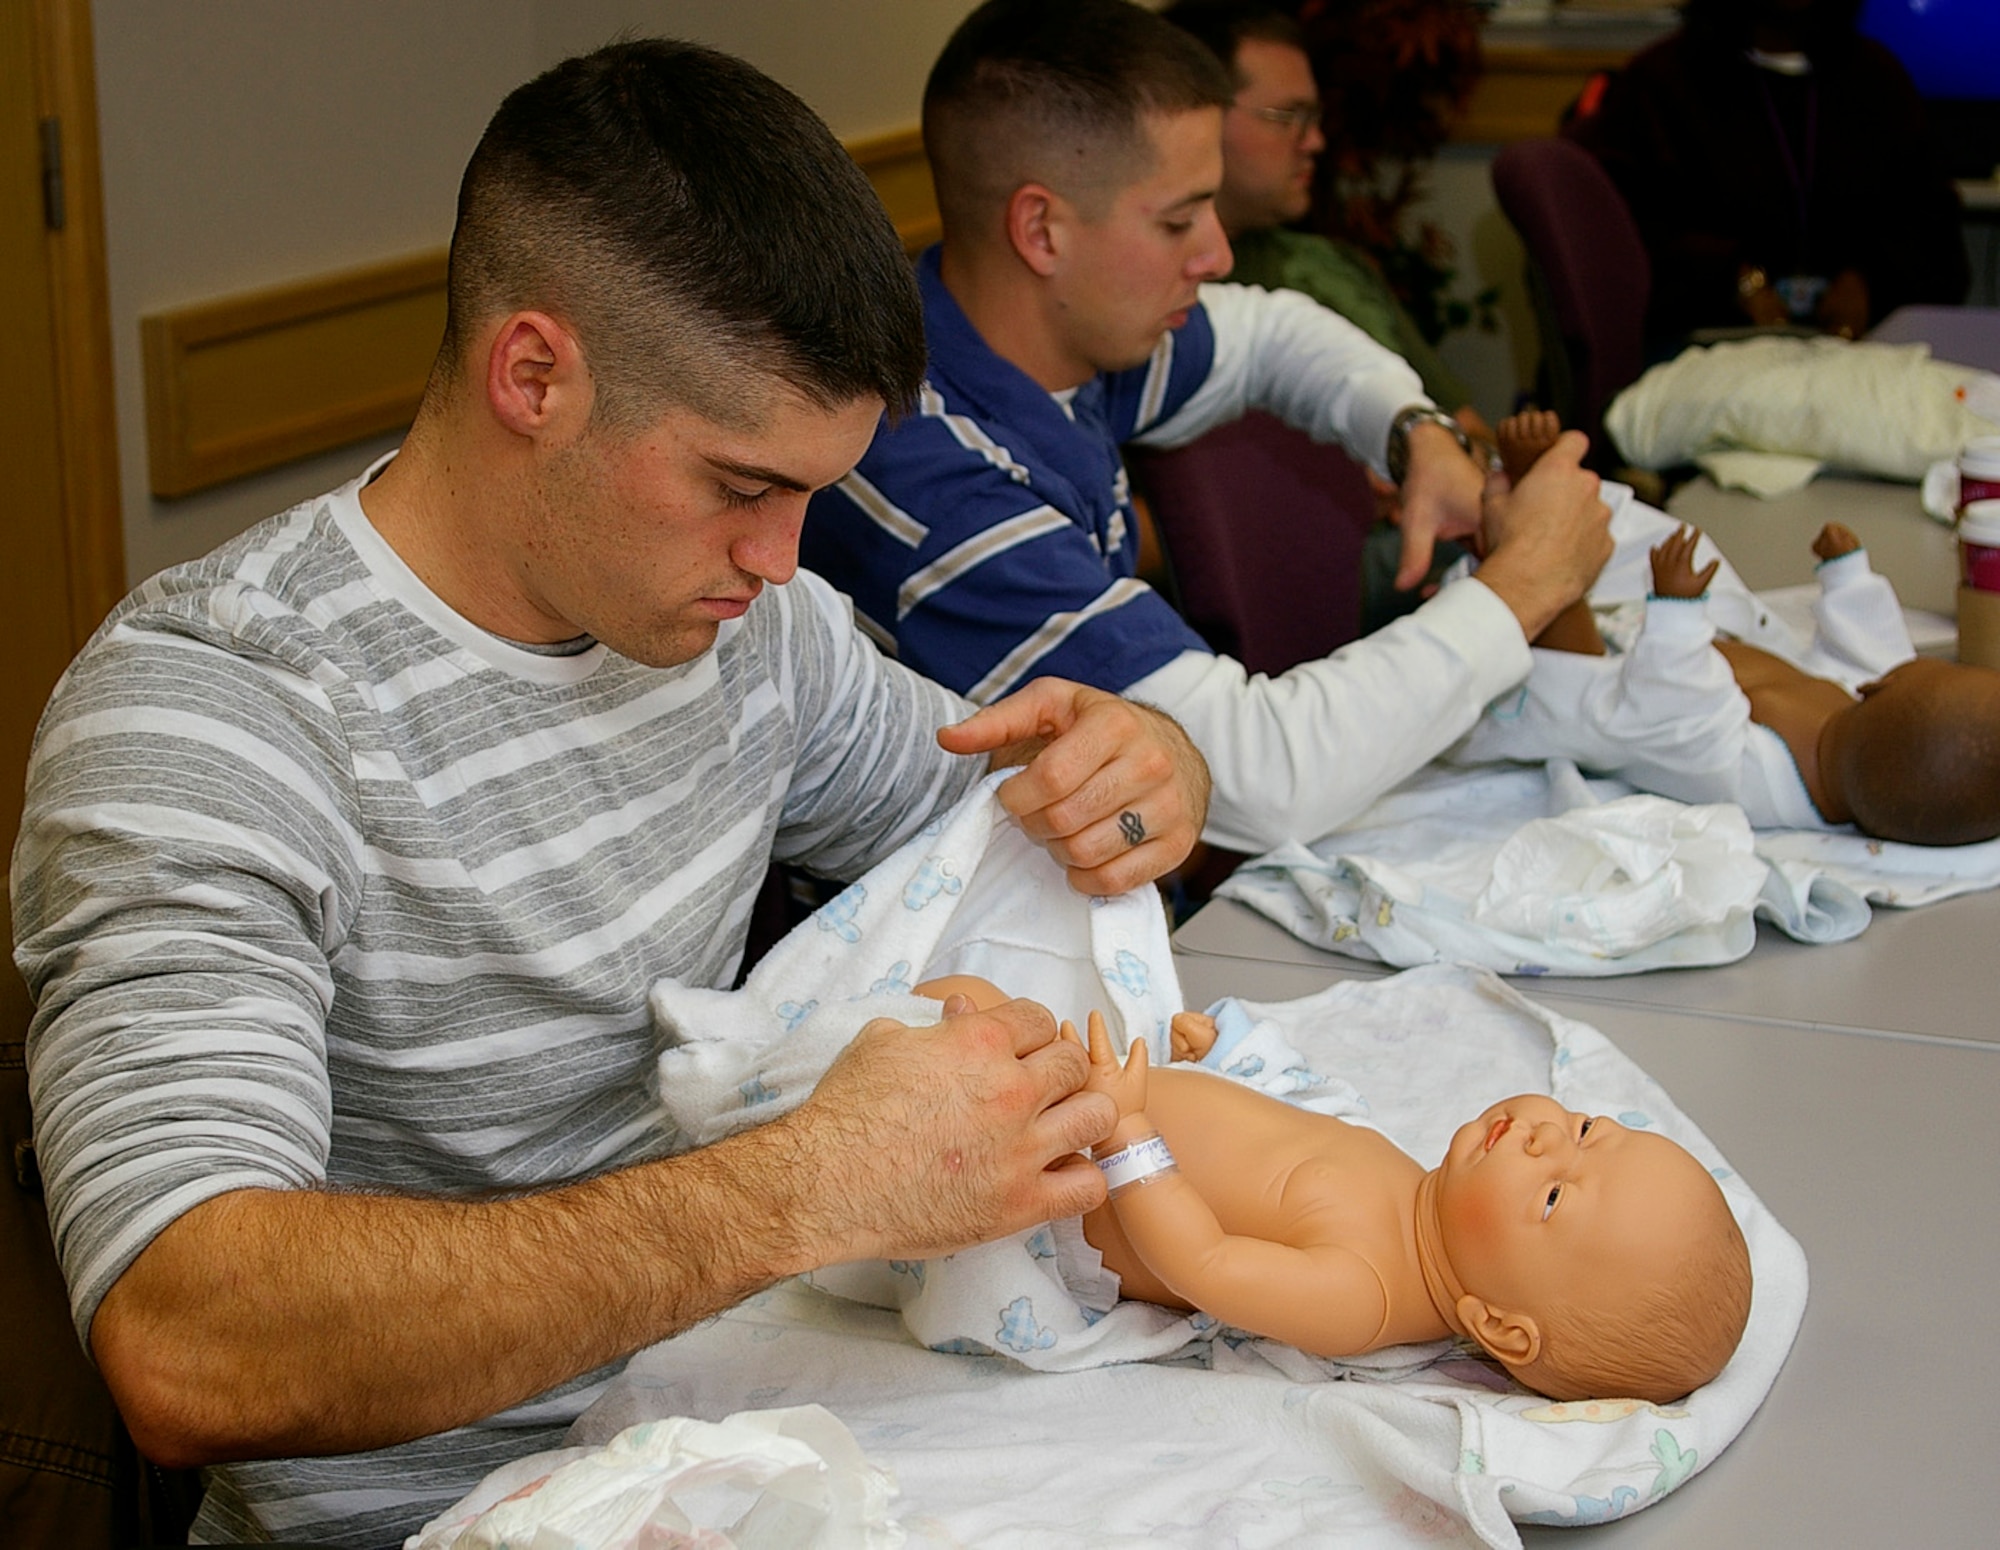 Senior Airman Joshua Haynes,left, 48th Component Maintenance Squadron, RAF Lakenheath, and Senior Airman Patrick Gooding, 48th Aircraft Maintenance Squadron, RAF Lakenheath, practice putting a diaper on a "baby" at the Dads Class at 48th Medical Operations Squadron Family Advocacy Oct. 26. The class, for men only, is instructed by an experienced father and topics include bringing baby home from hospital, changing diapers, and breastfeeding. (U.S. Air Force photo by Karen Abeyasekere)